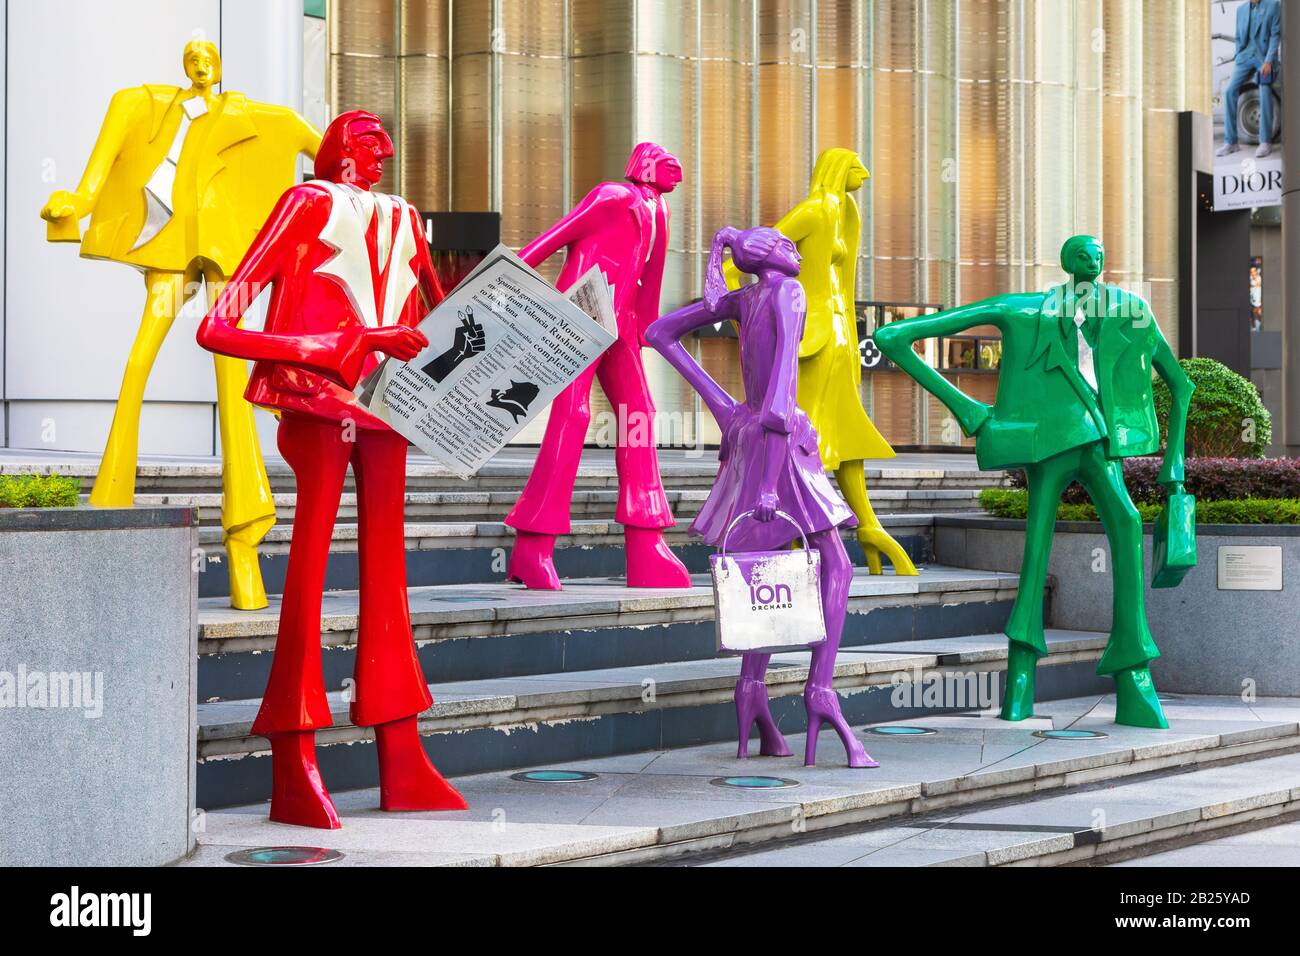 Artistic statues representing shoppers on the steps outside the famous shopping mall ION, on Orchard Road, Singapore, Asia Stock Photo